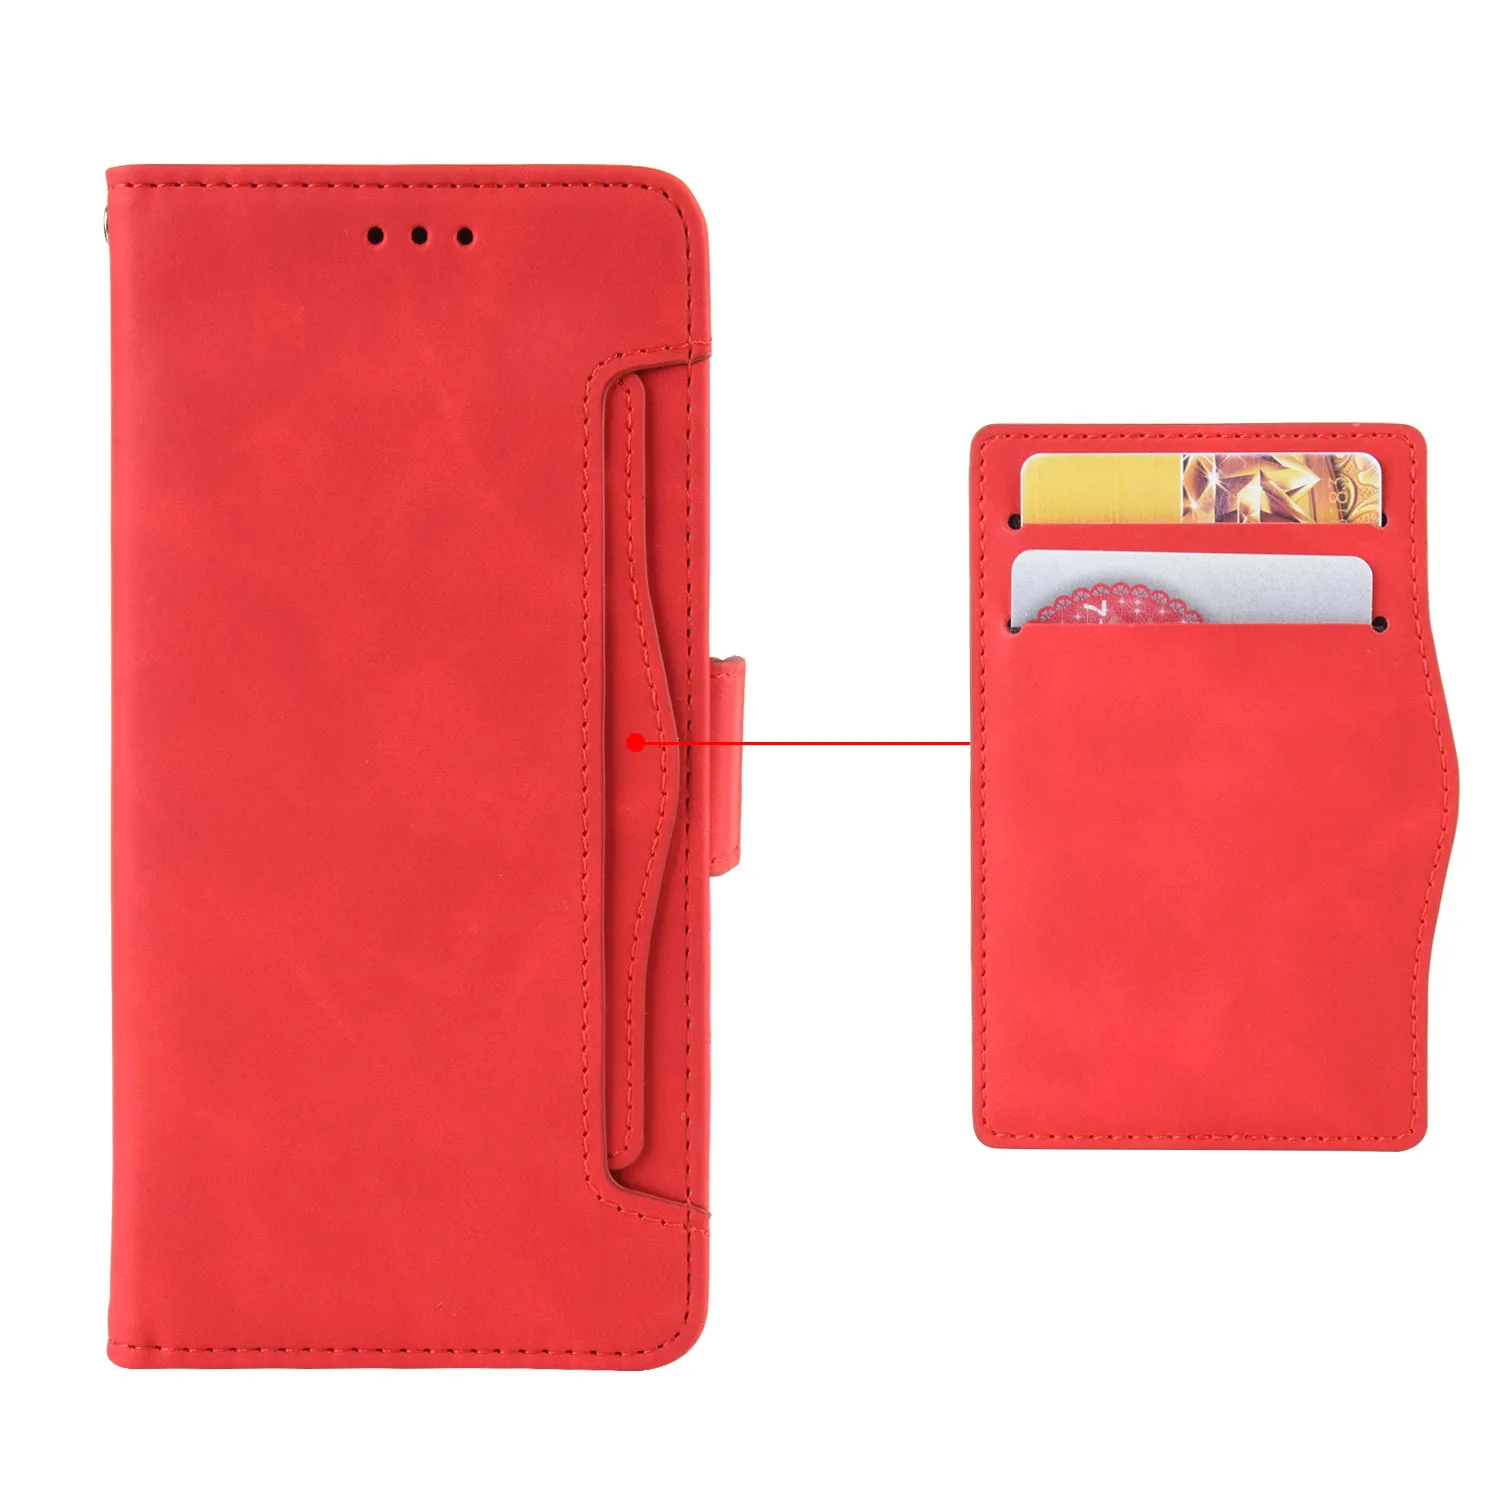 leather case for xiaomi Flip Wallet Case For Xiaomi 10 Pro 9SE CC9 Redmi Note 9s 8 8A 7S 9T 8T K30 K20 Leather Multi Card Holder Full Protection Shell leather case for xiaomi Cases For Xiaomi